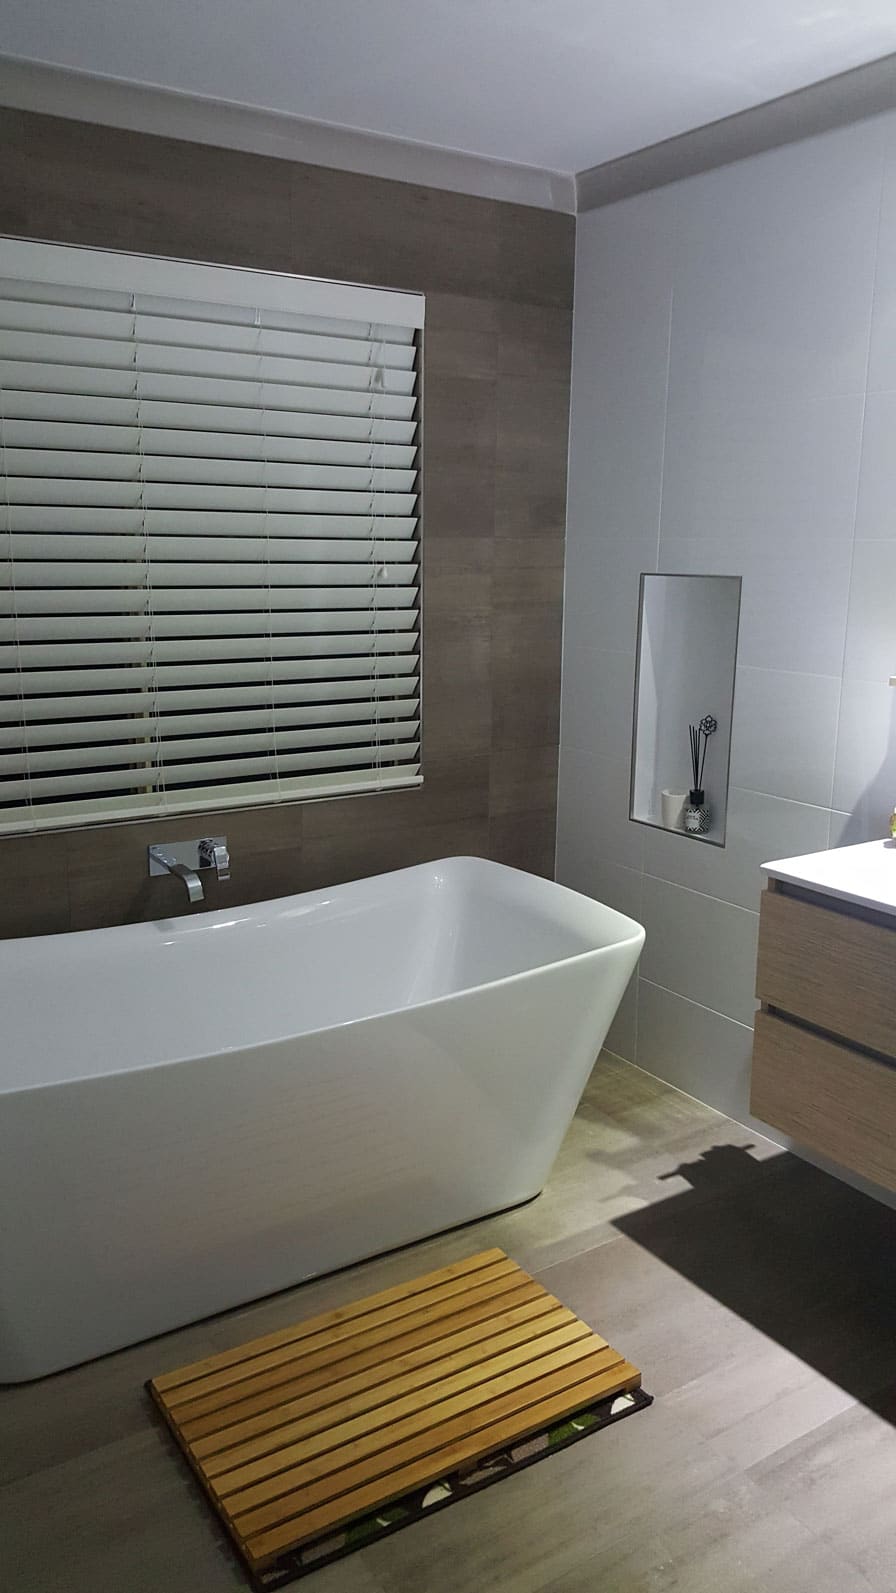 A small bathroom with brown wall tiles